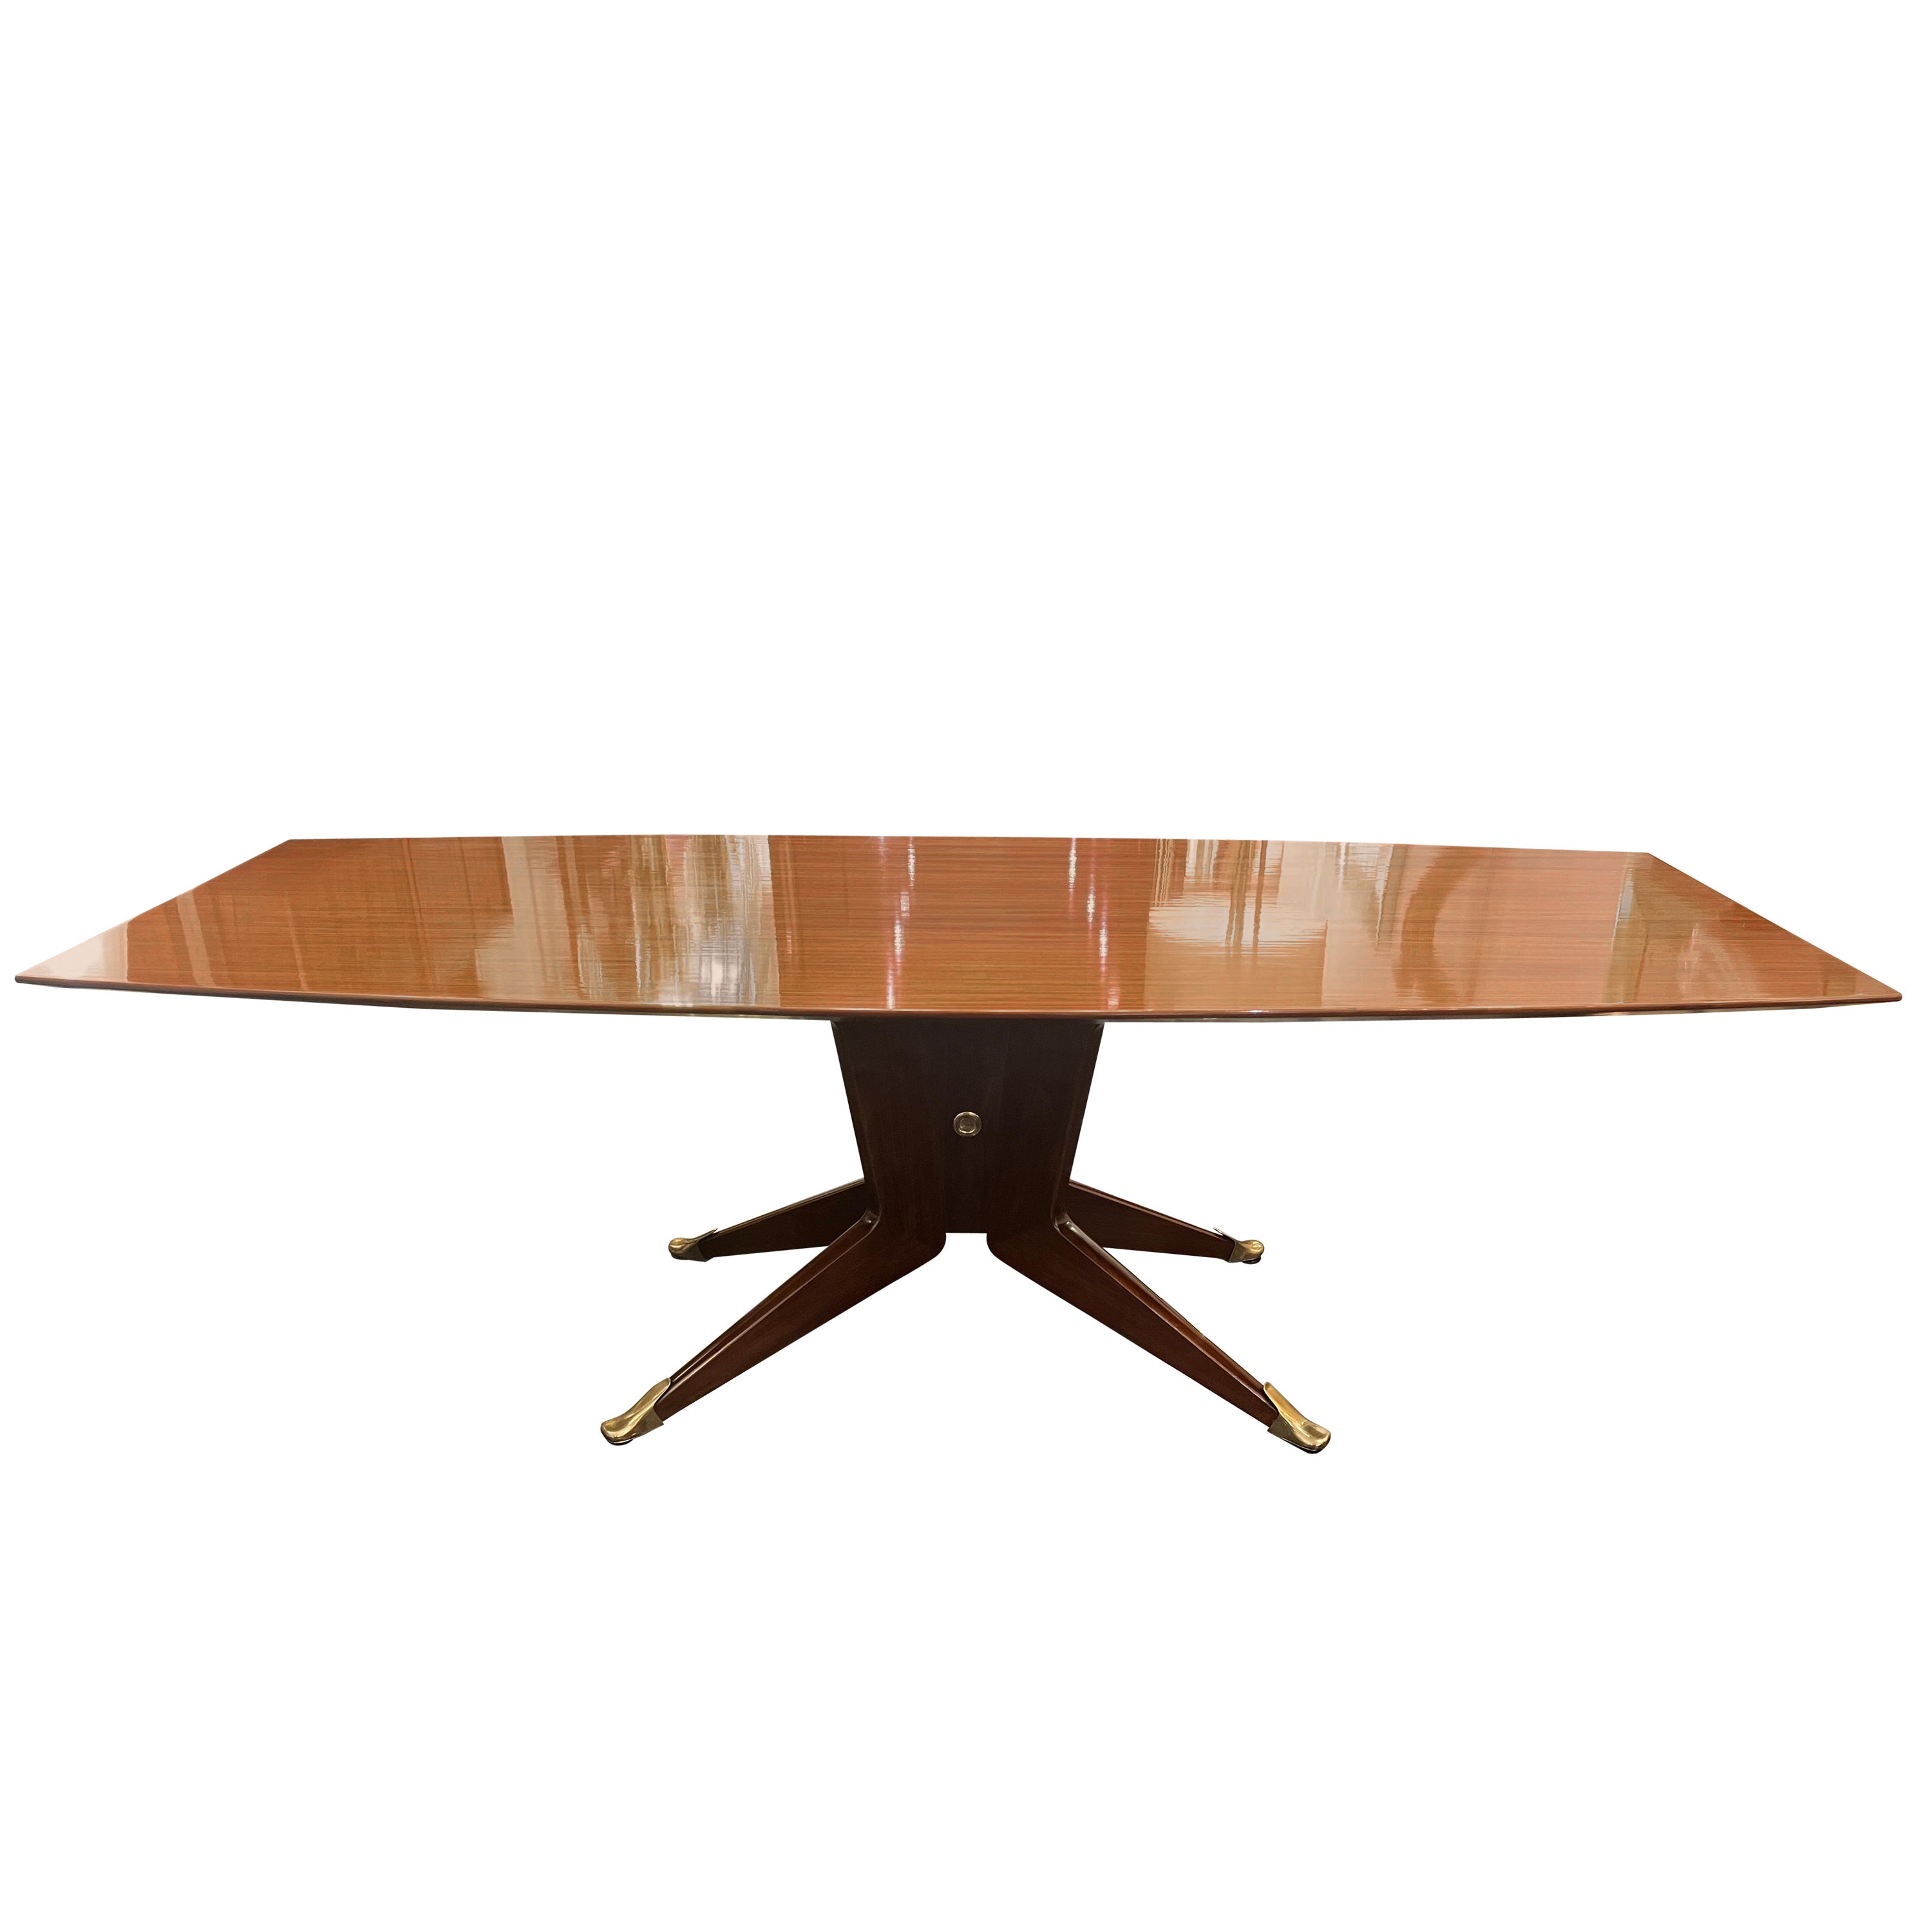 A large cherrywood dining table by Melchiorre Bega 